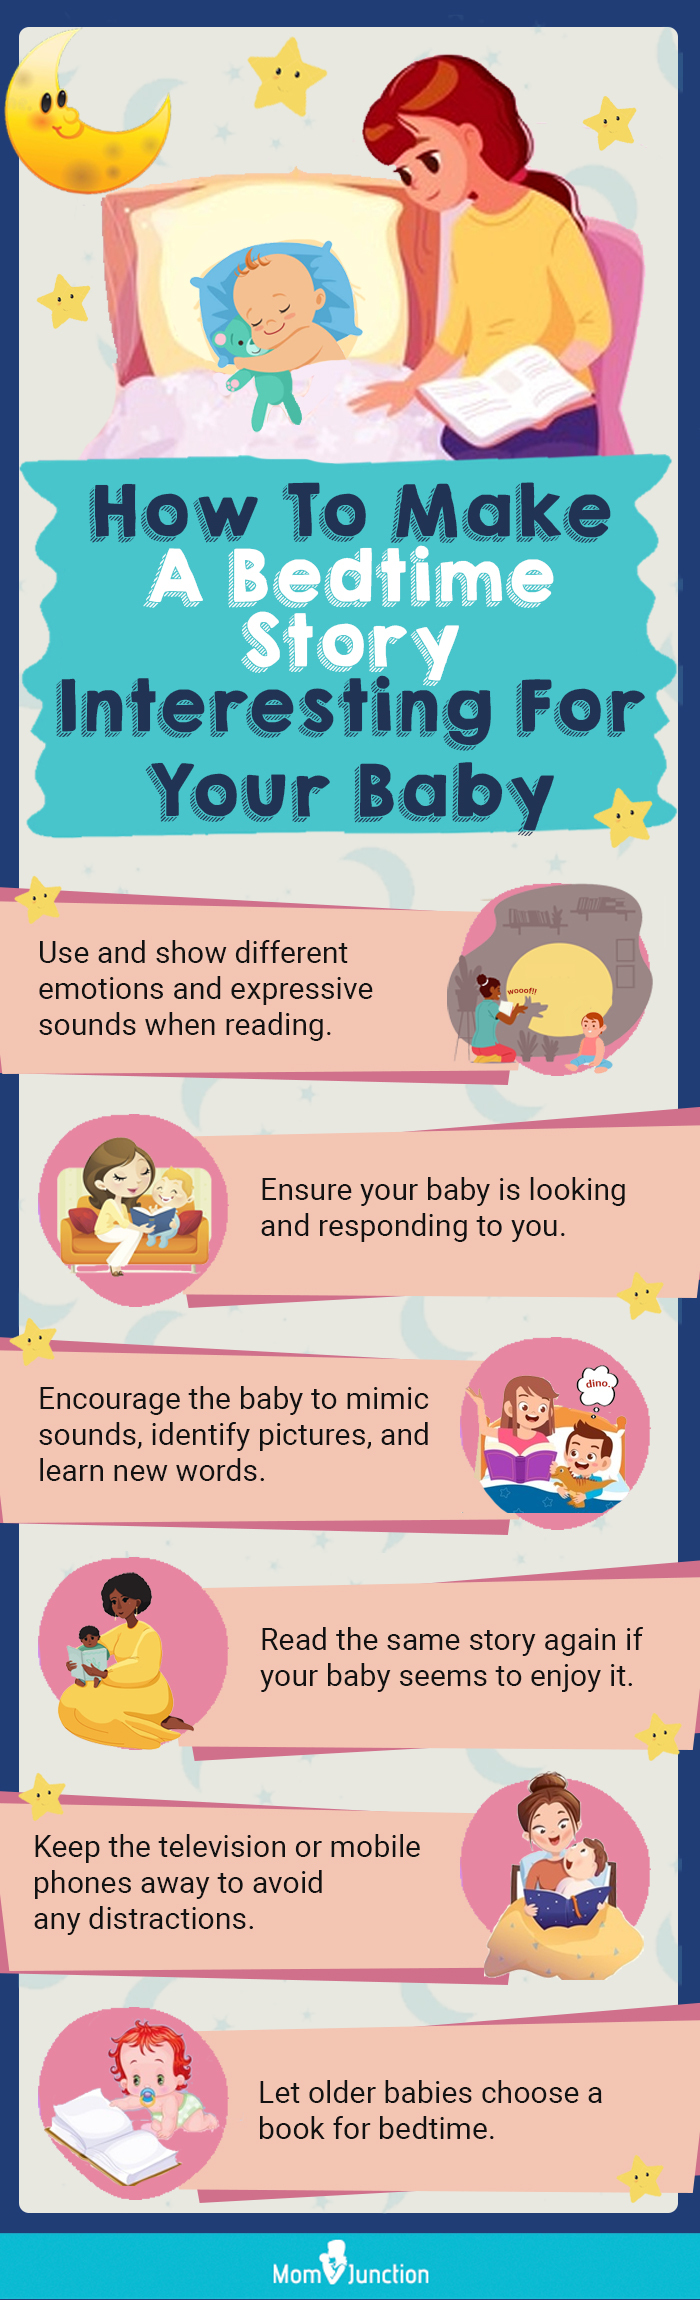 how to make a bedtime story interesting for your baby (infographic)